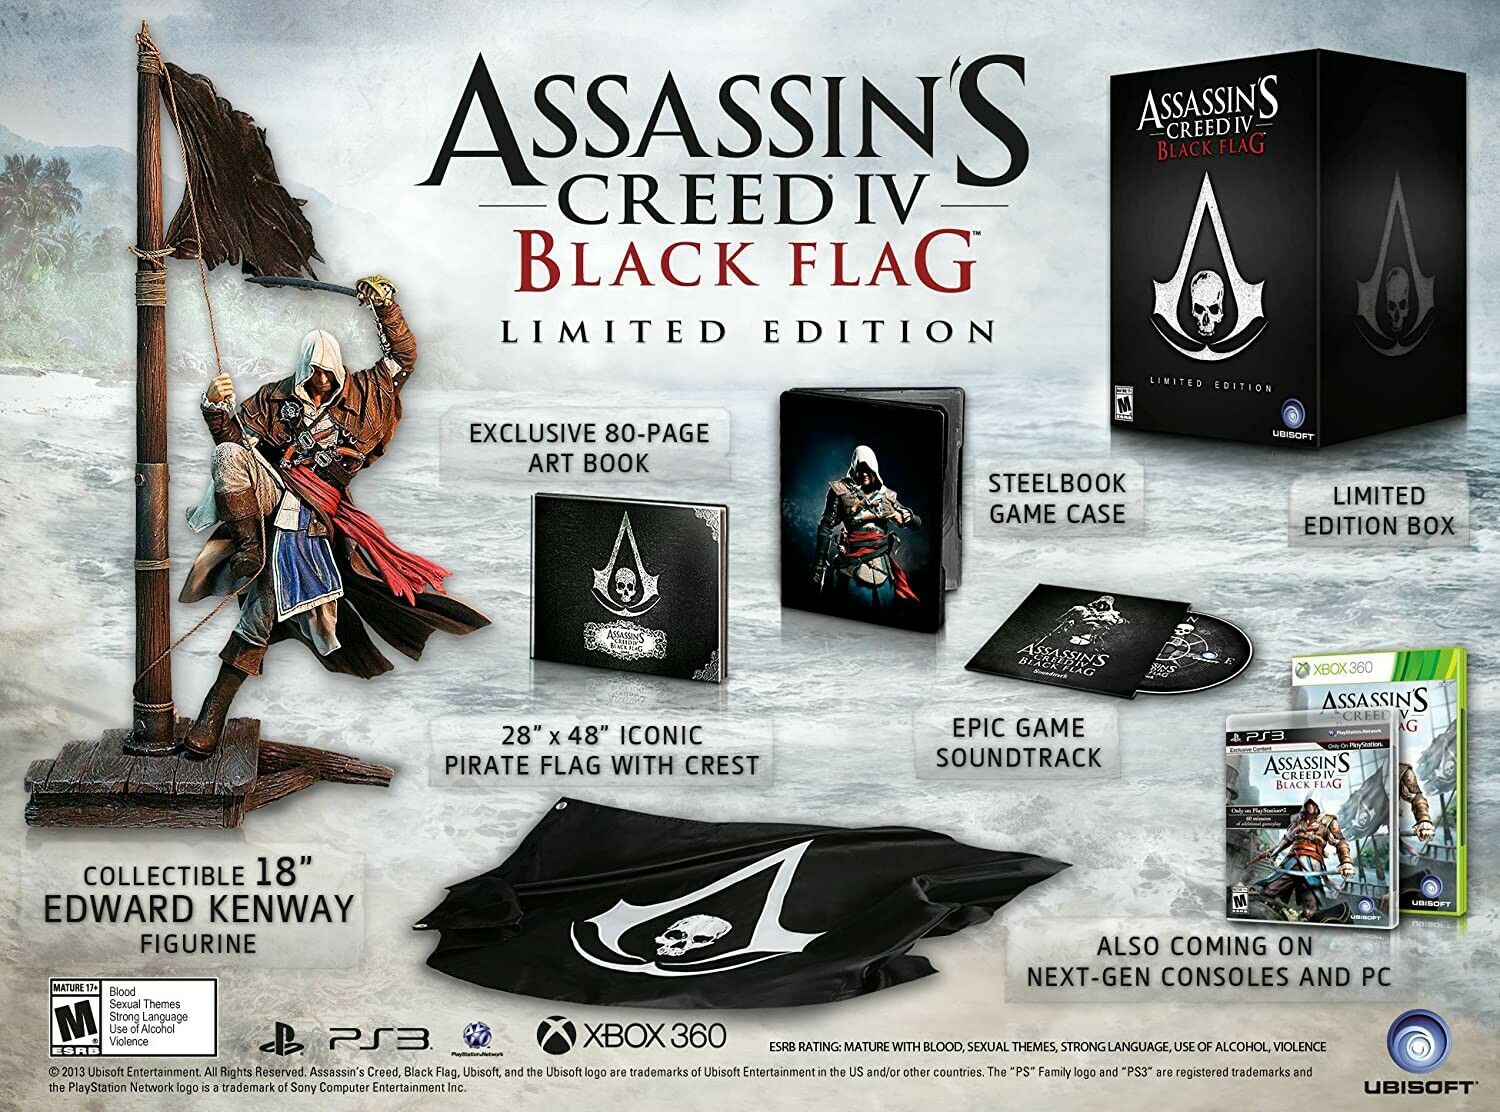 Assassin's Creed IV: Black Flag - Limited Edition (Xbox 360) Popularne tanie